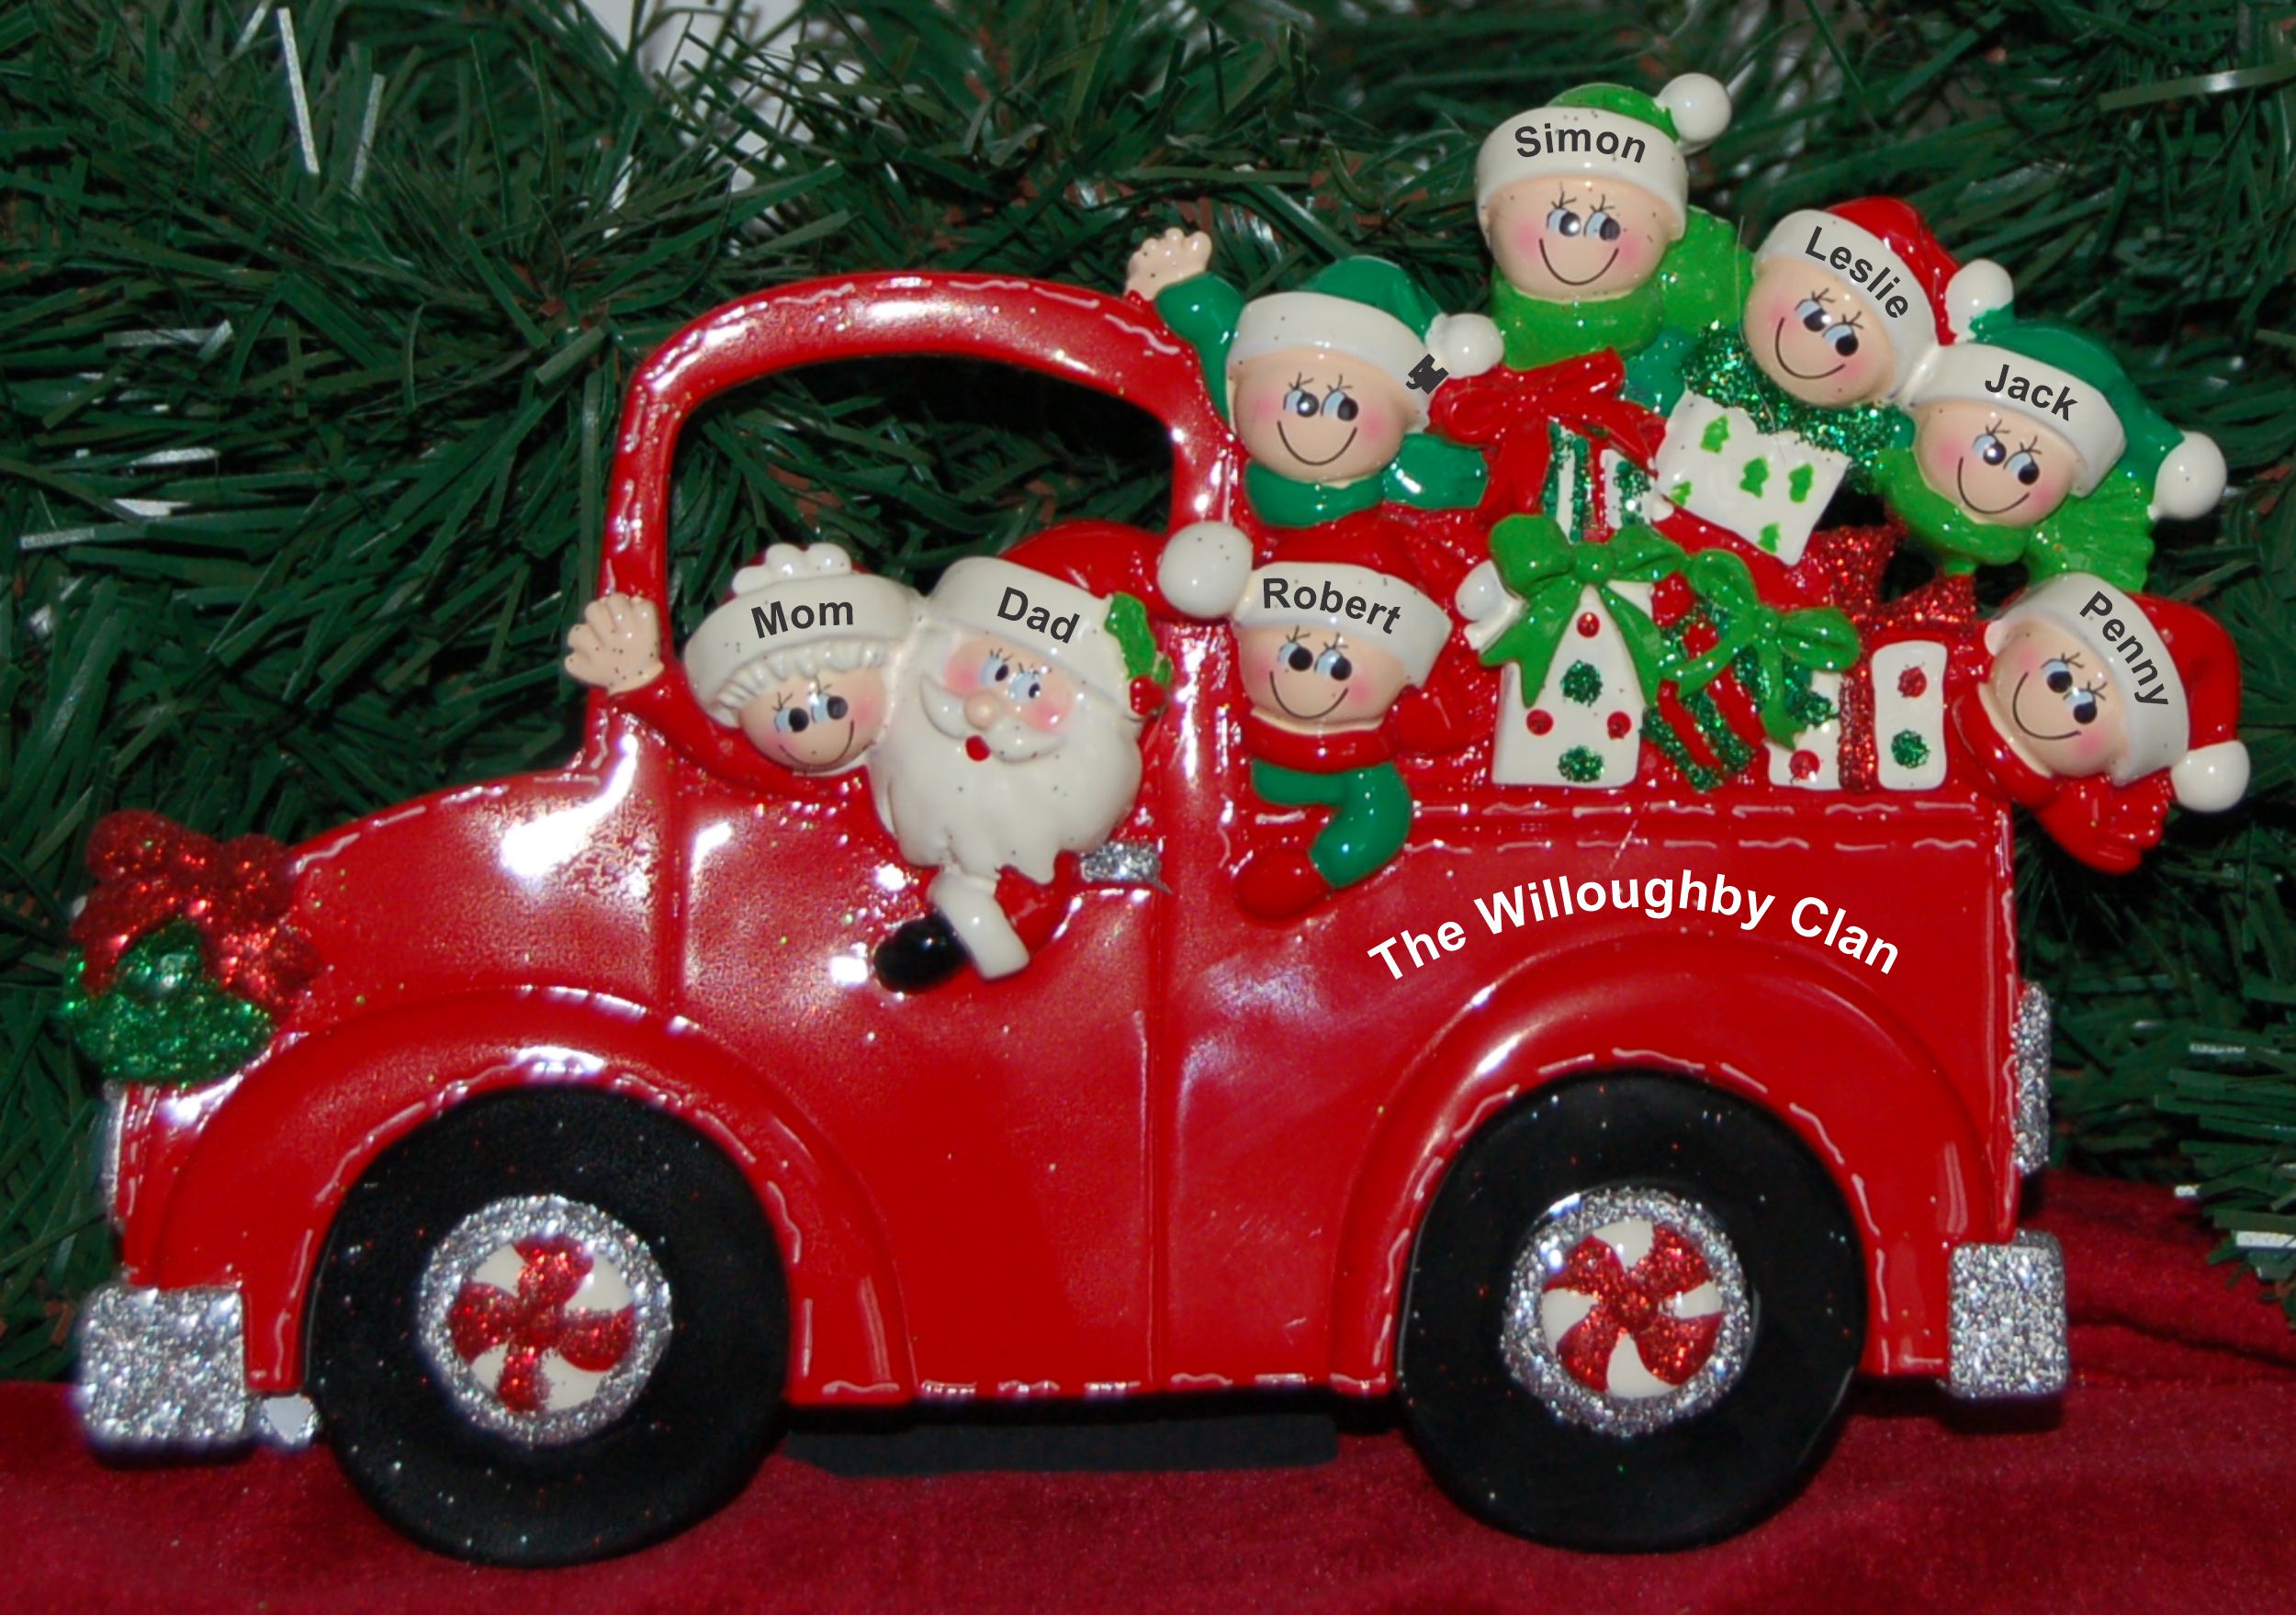 Tabletop Christmas Decoration Fire Engine Family 8 Personalized by RussellRhodes.com